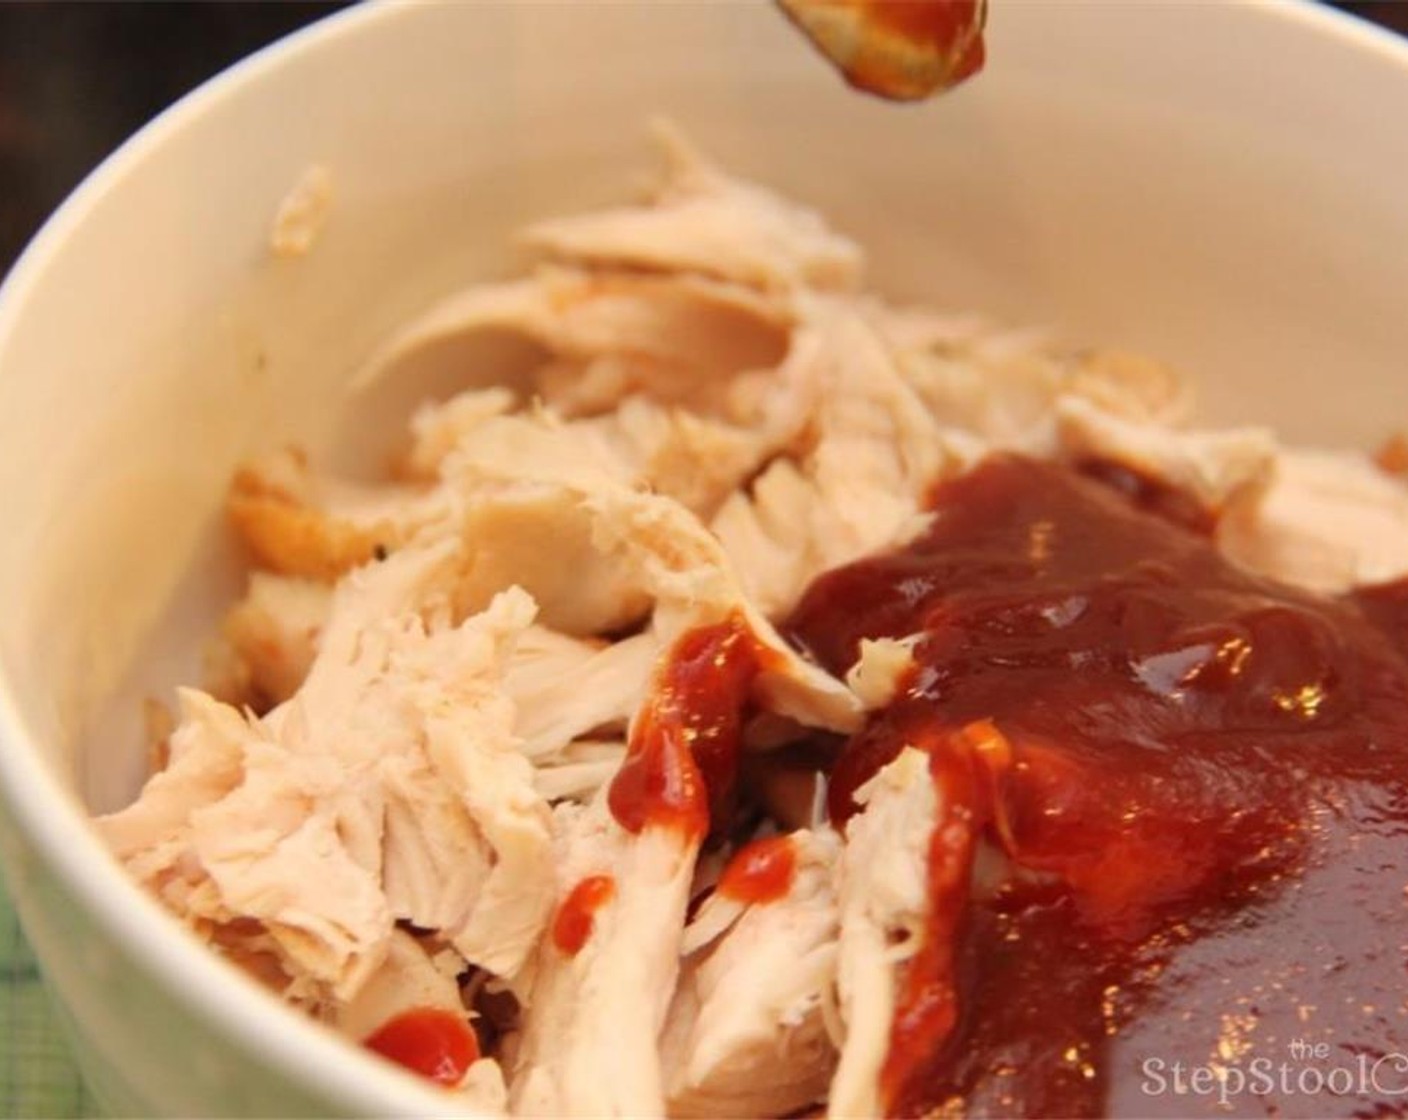 step 2 Mix together the Rotisserie Chicken (2 cups) and your favorite Barbecue Sauce (1/2 cup).